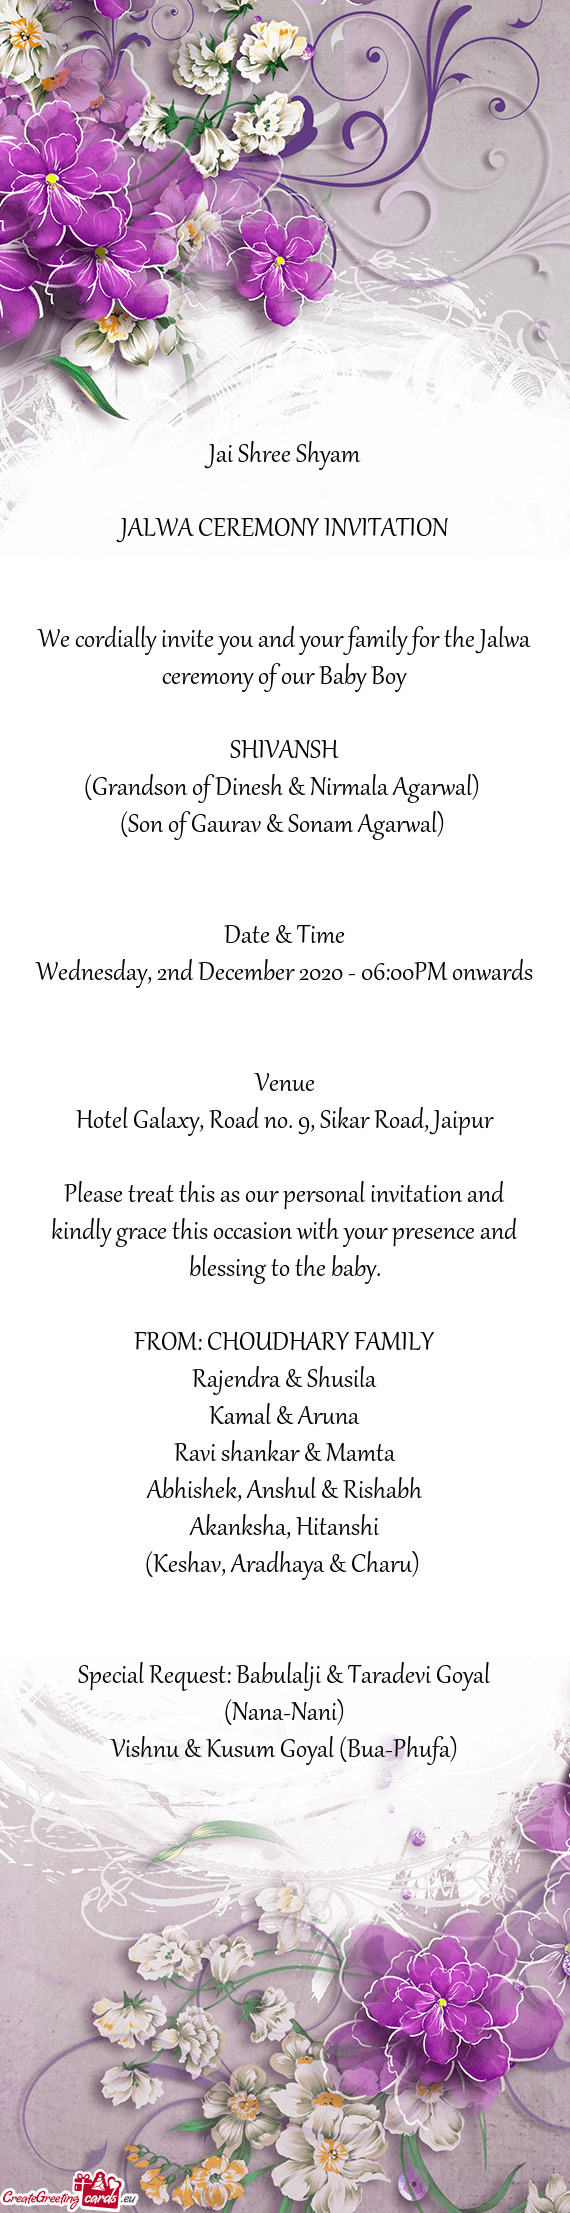 We cordially invite you and your family for the Jalwa ceremony of our Baby Boy